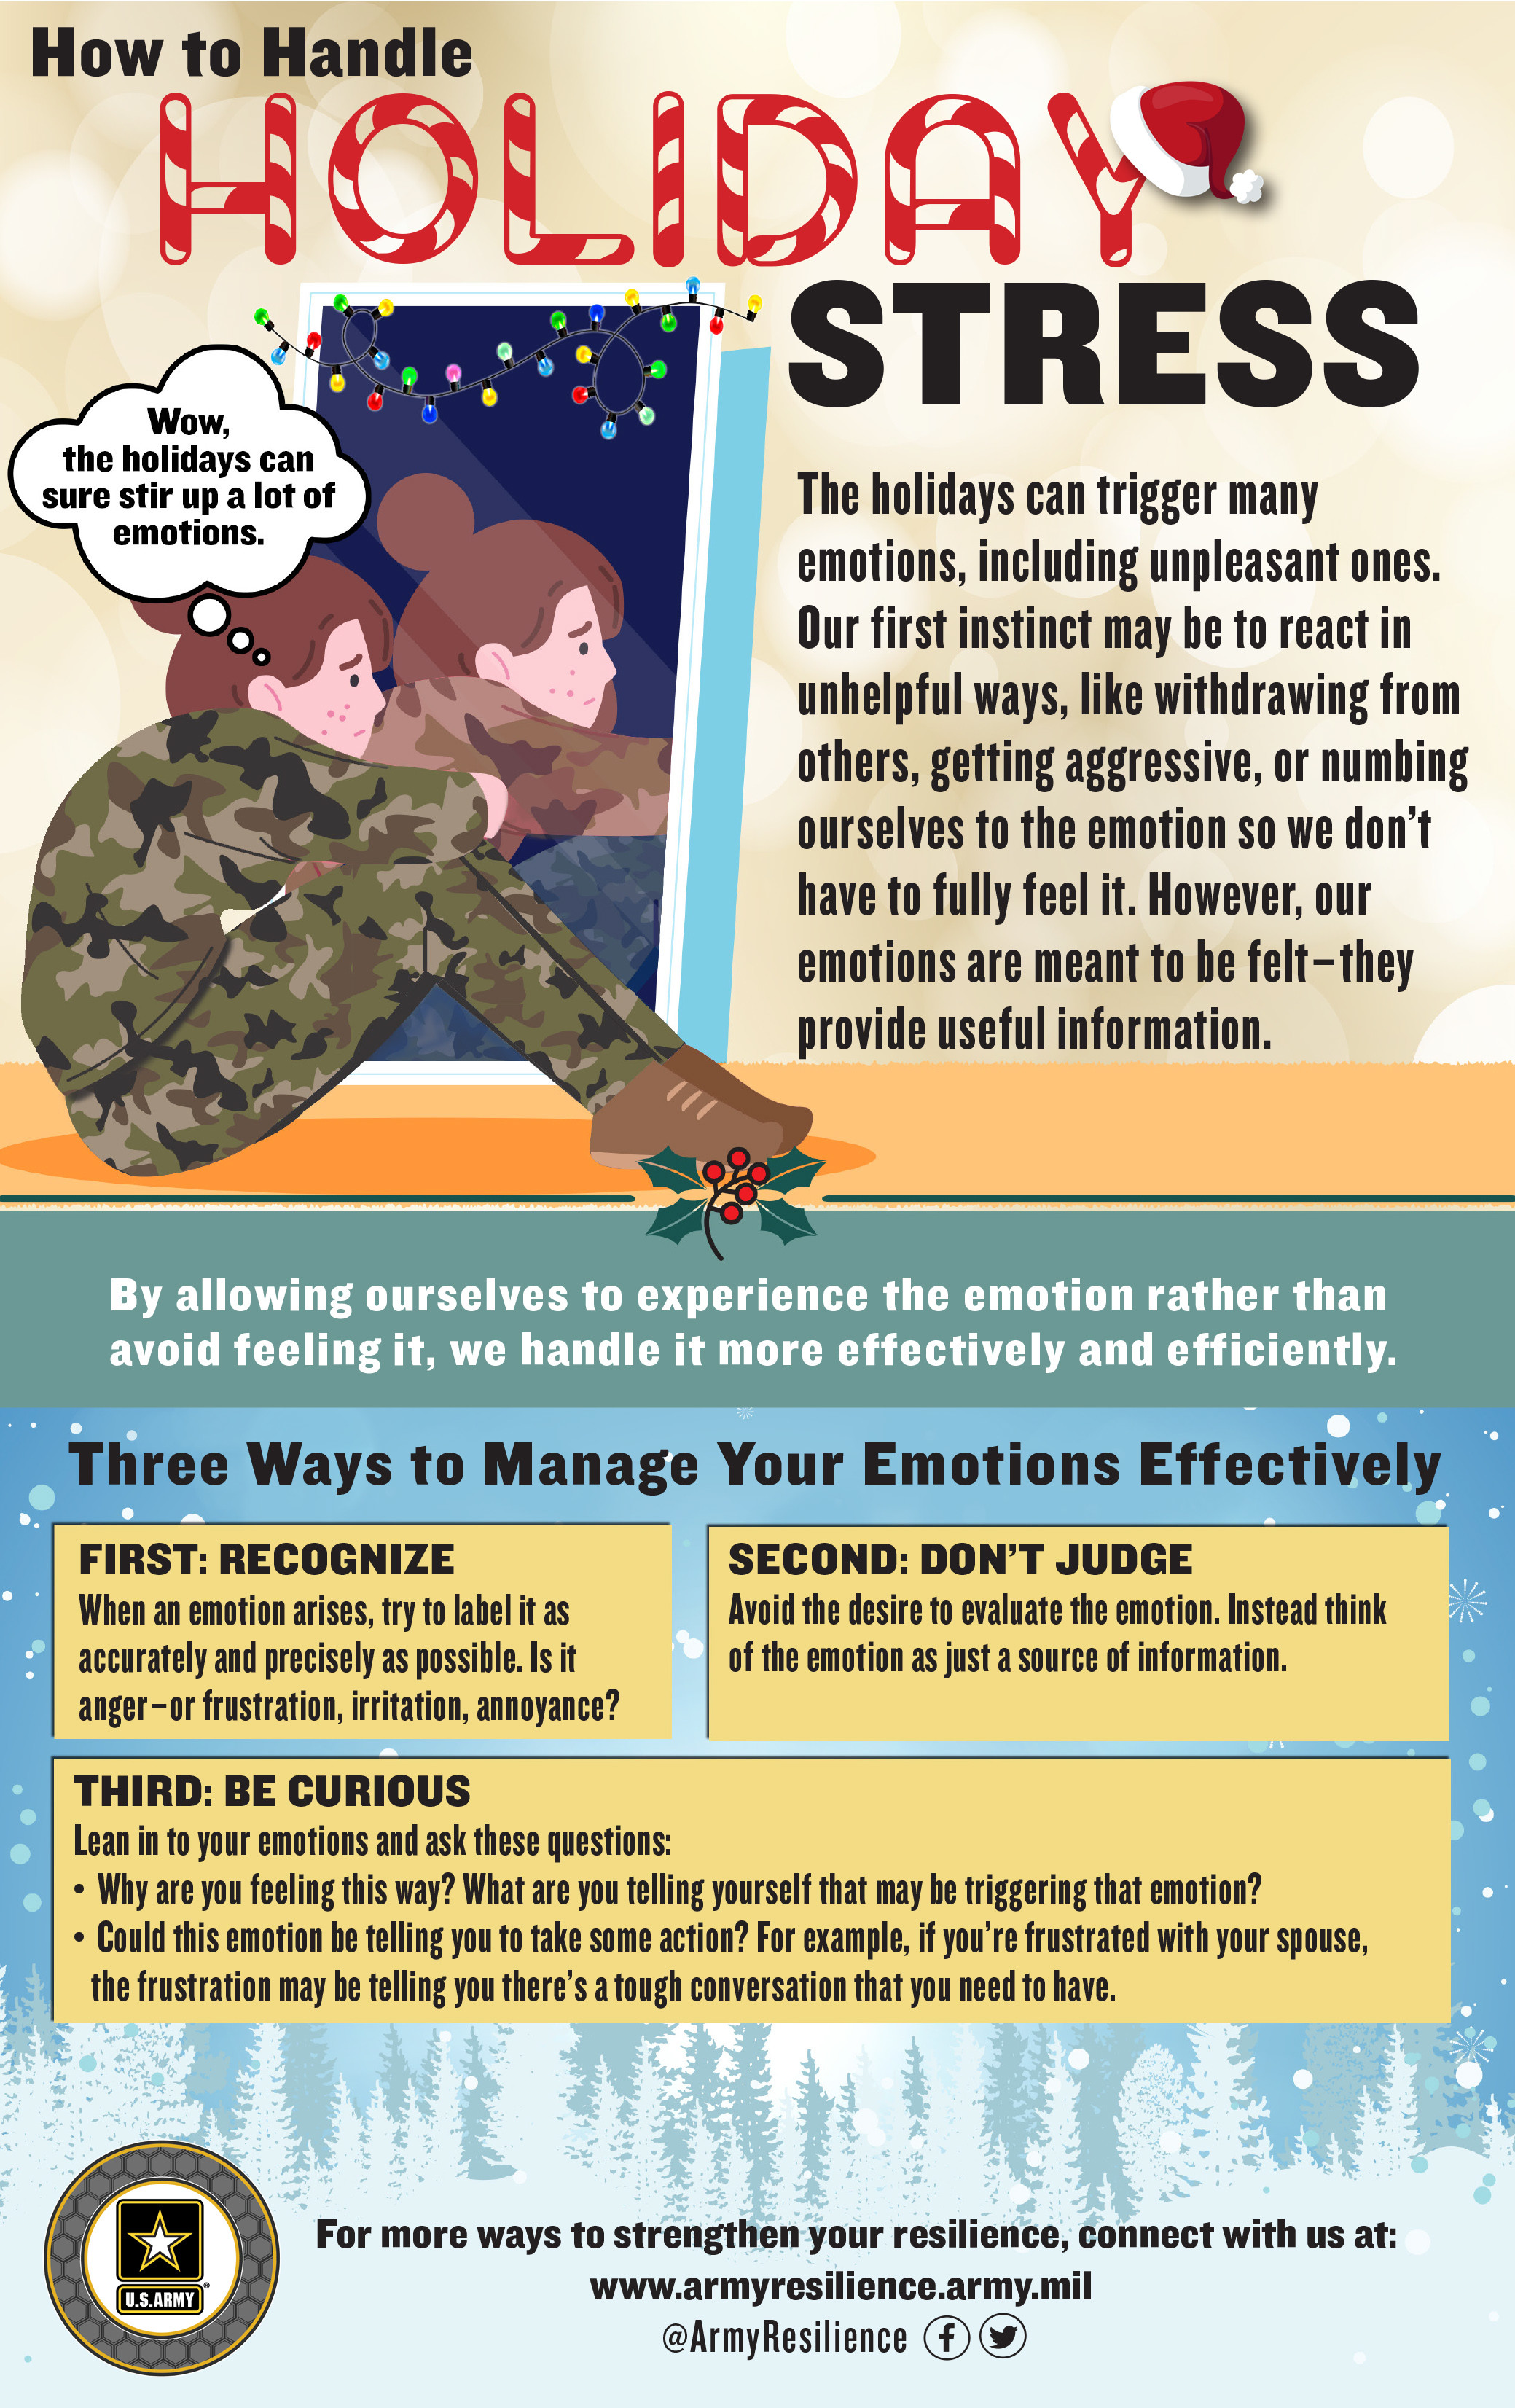 Learn how to handle holiday stress effectively > 960th Cyberspace